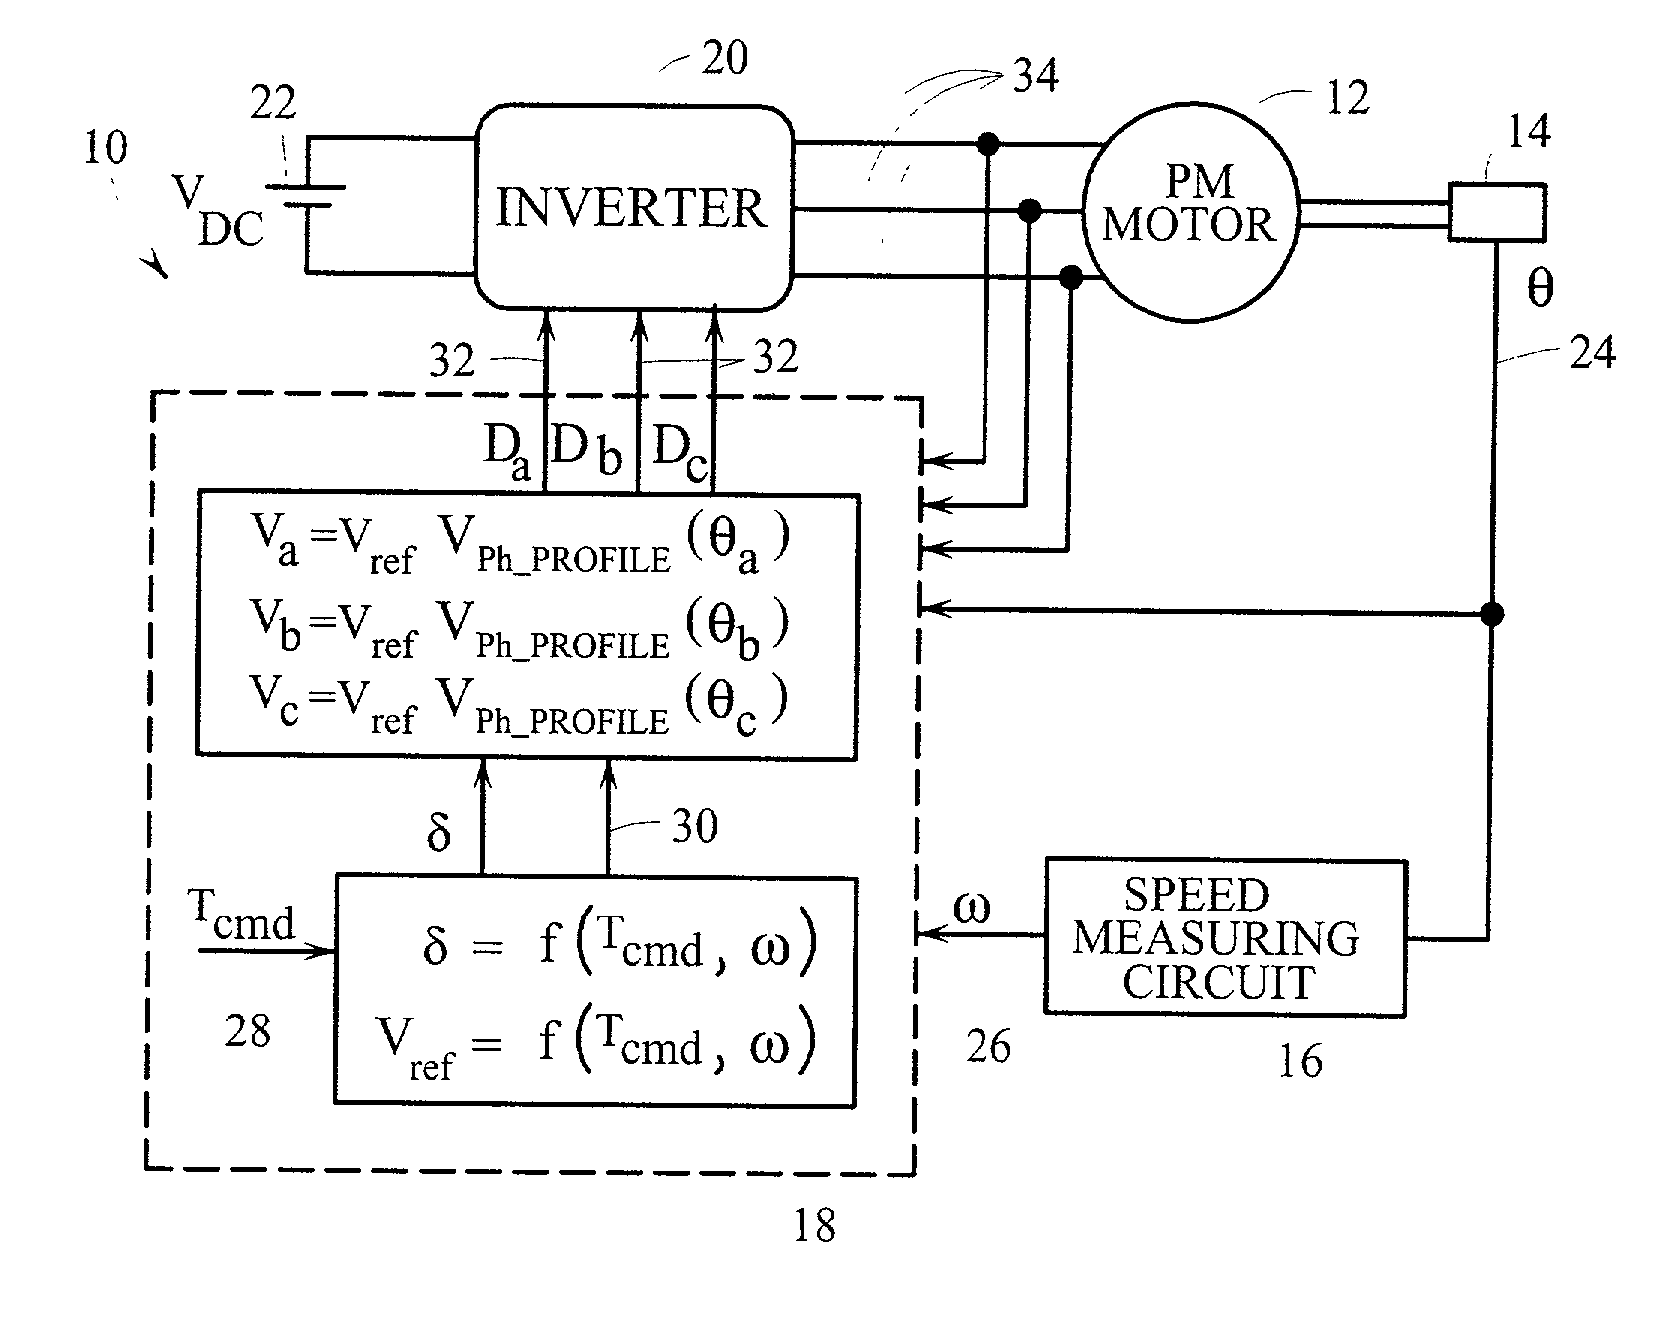 Switching methodology for ground referenced voltage controlled electric machine